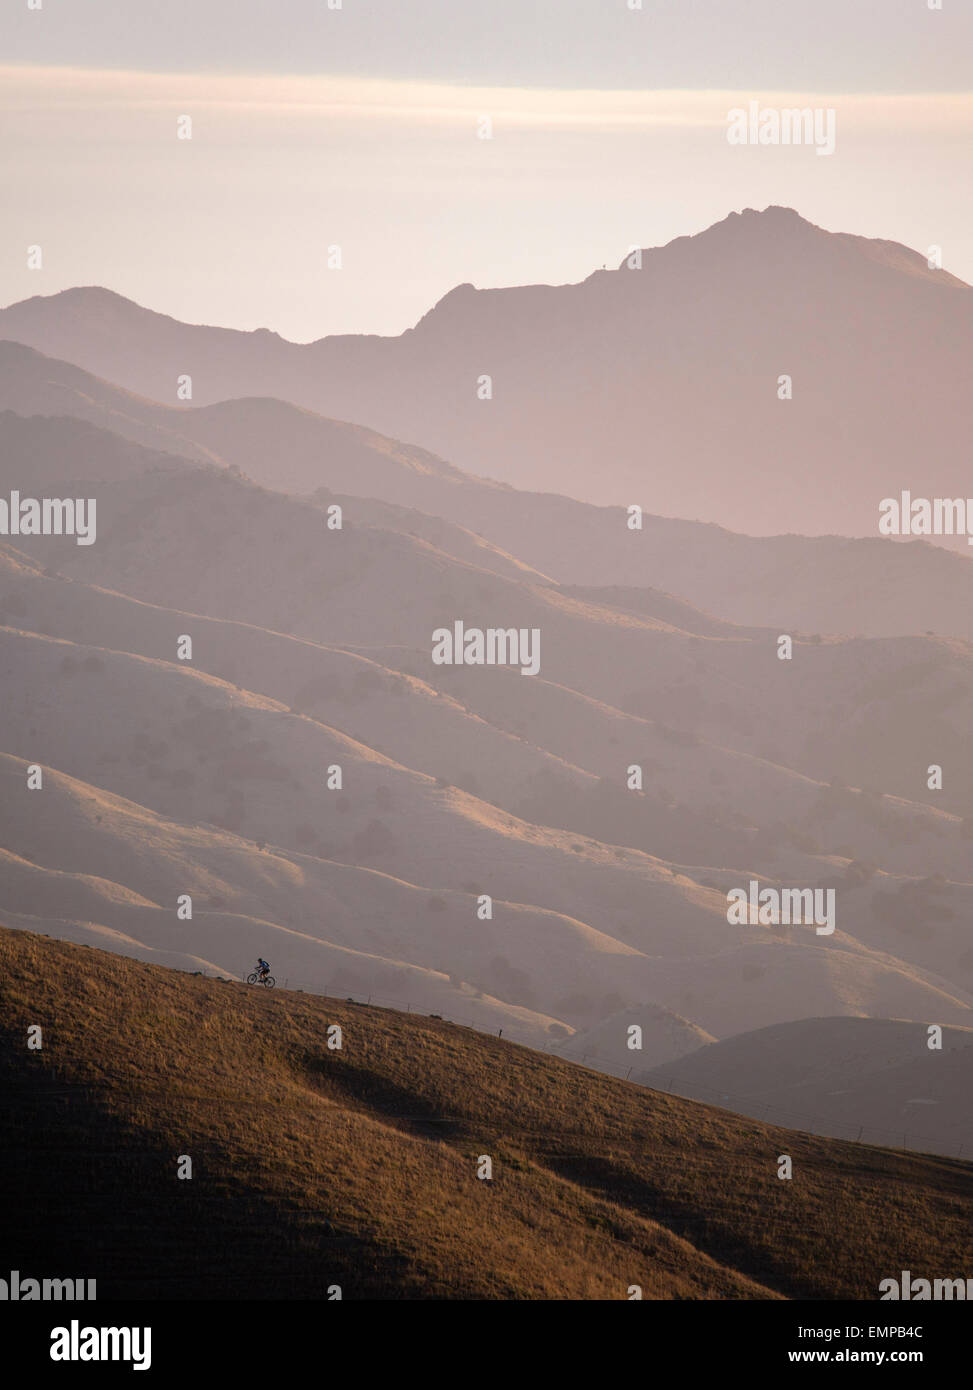 Mountain biker riding a ridge in the Wither Hills with the Blairich Range beyond. Marlborough, New Zealand. Stock Photo